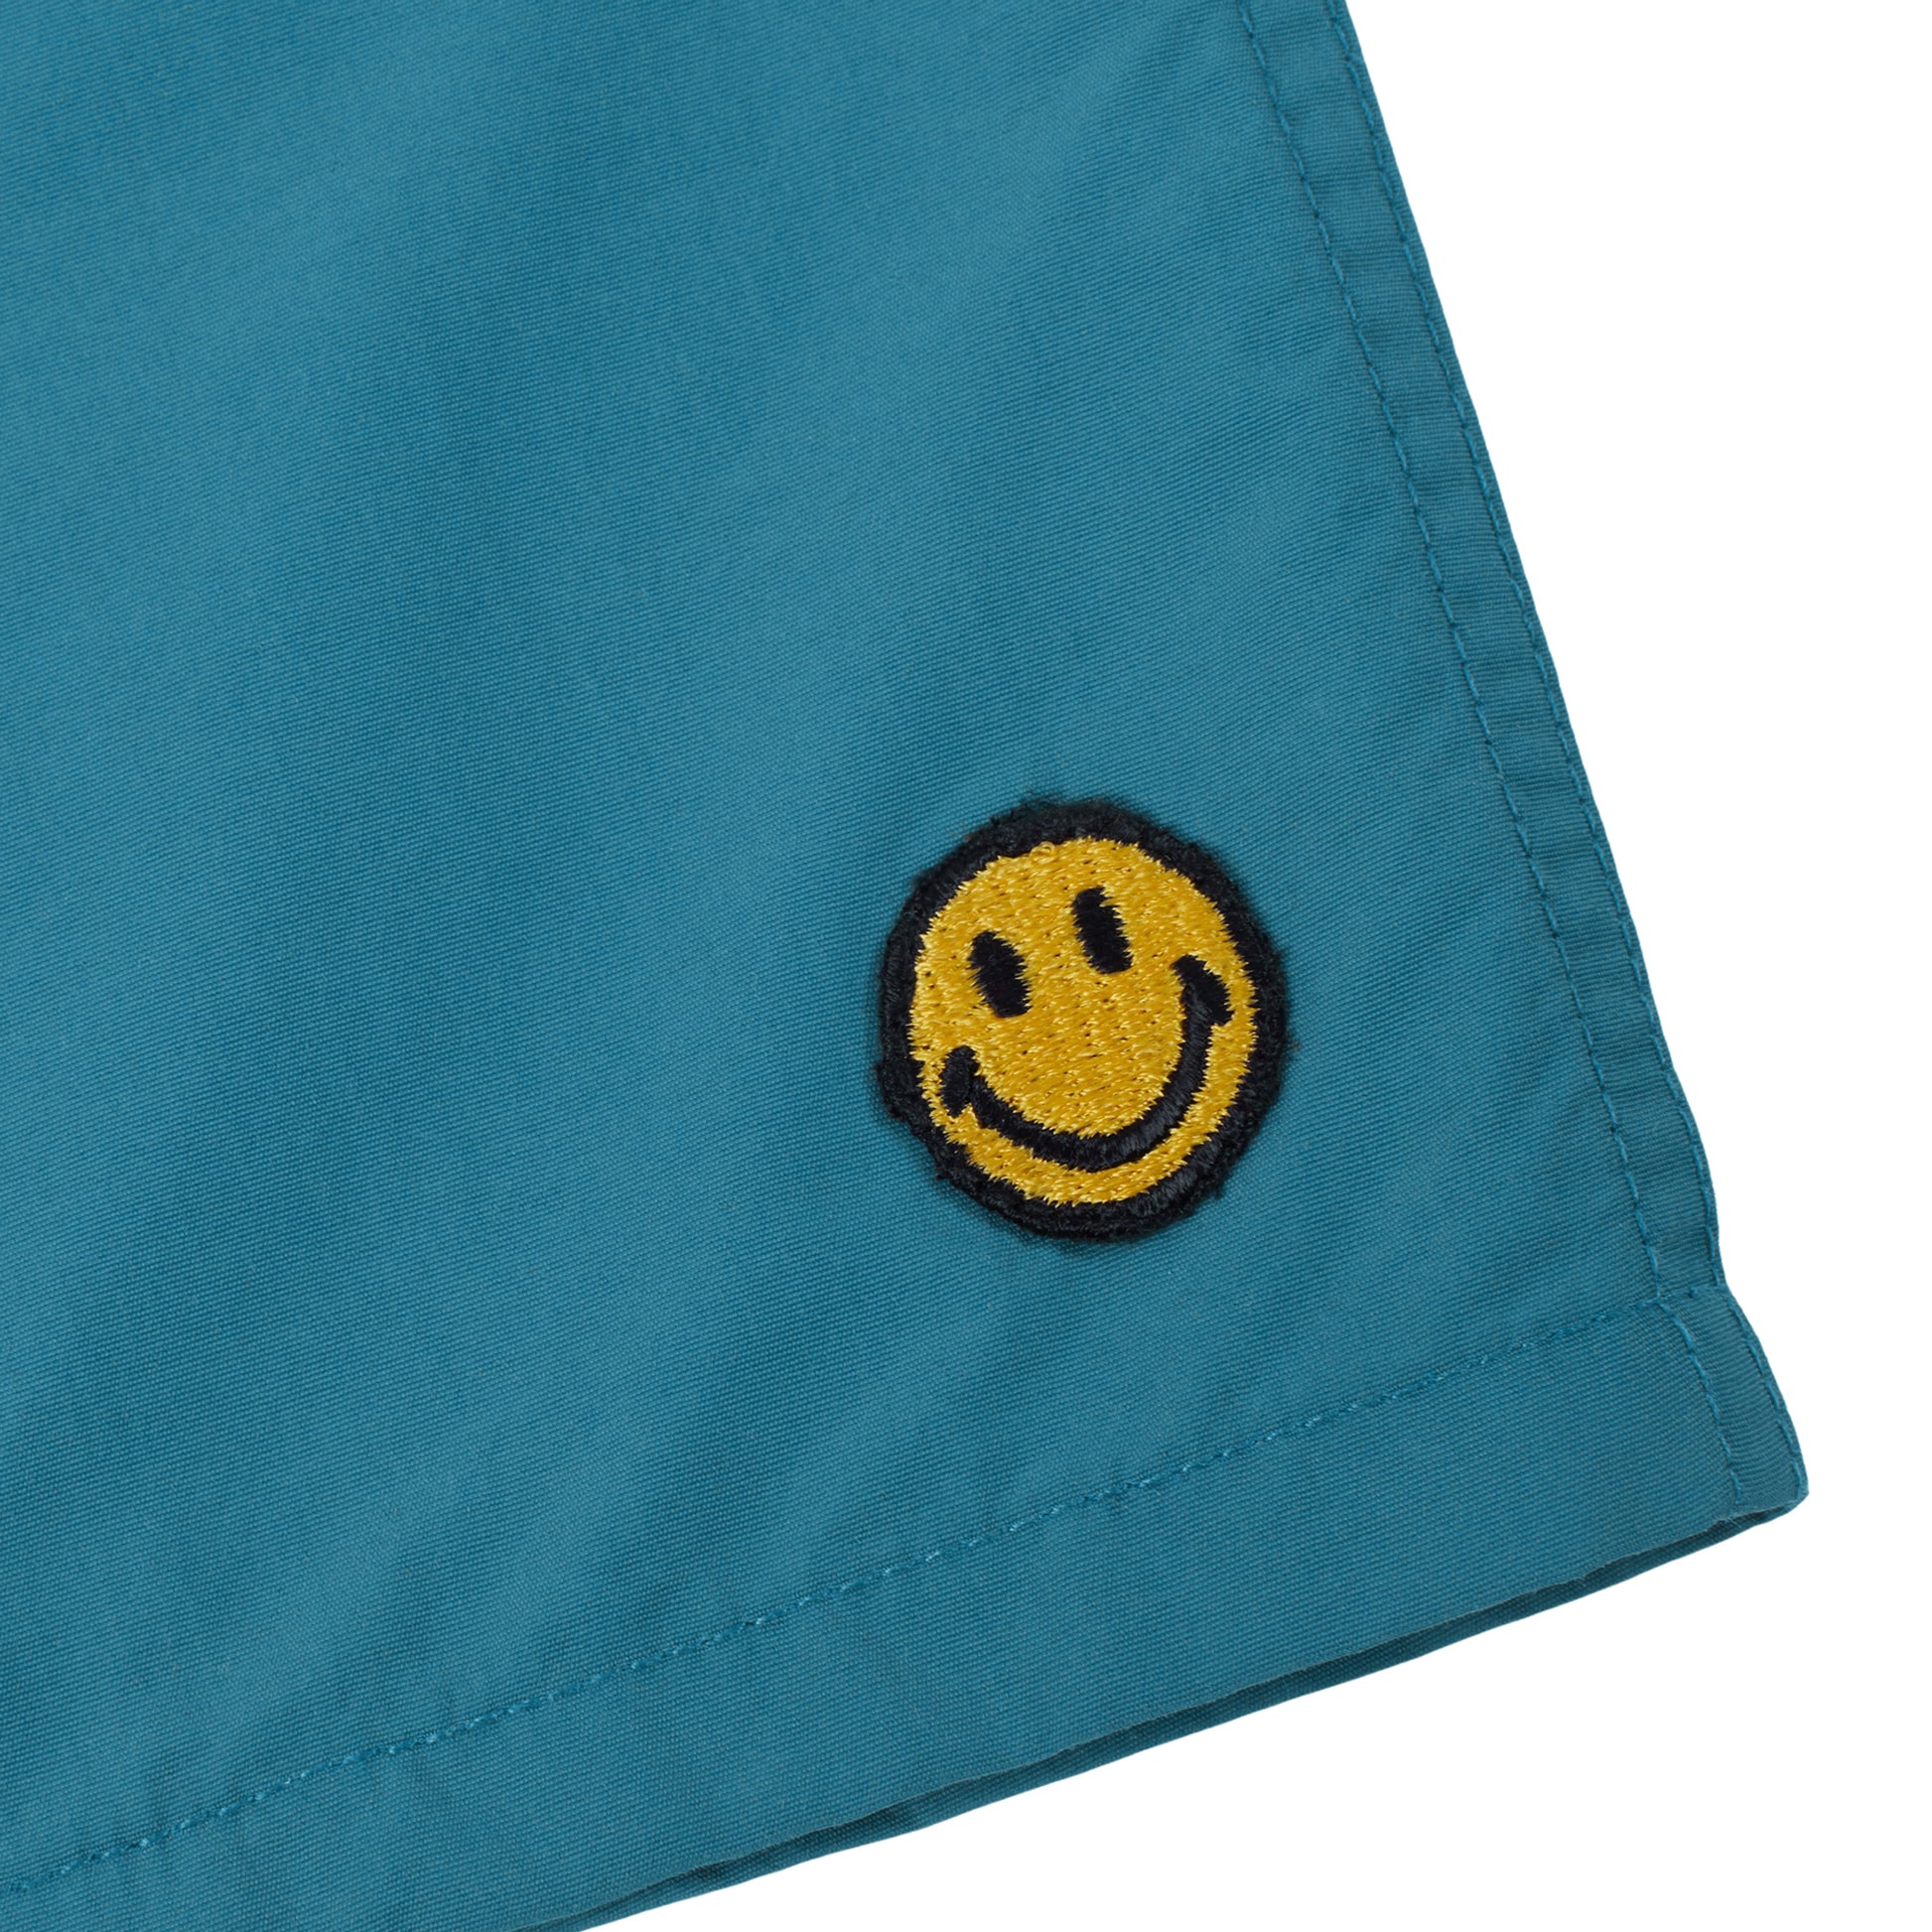 MARKET clothing brand SMILEY TECH SHORTS. Find more graphic tees, sweatpants, shorts and more bottoms at MarketStudios.com. Formally Chinatown Market. 